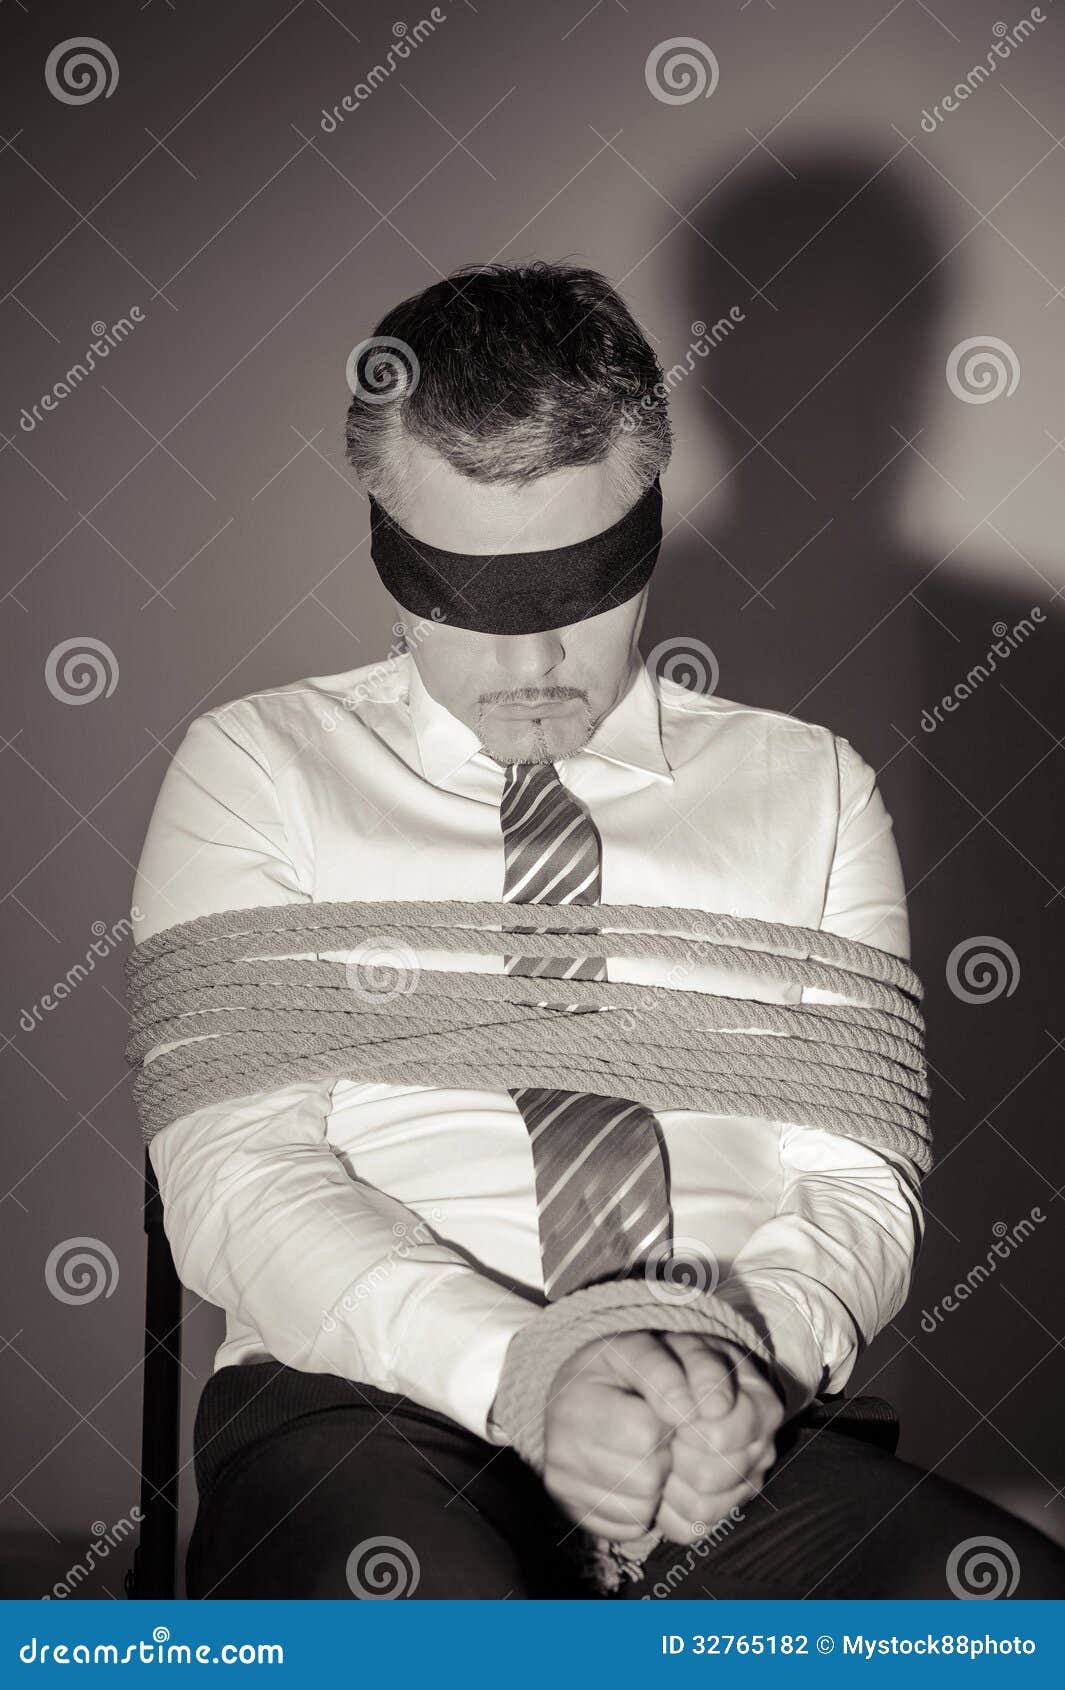 Kidnapped businessman stock photo Image of collar 